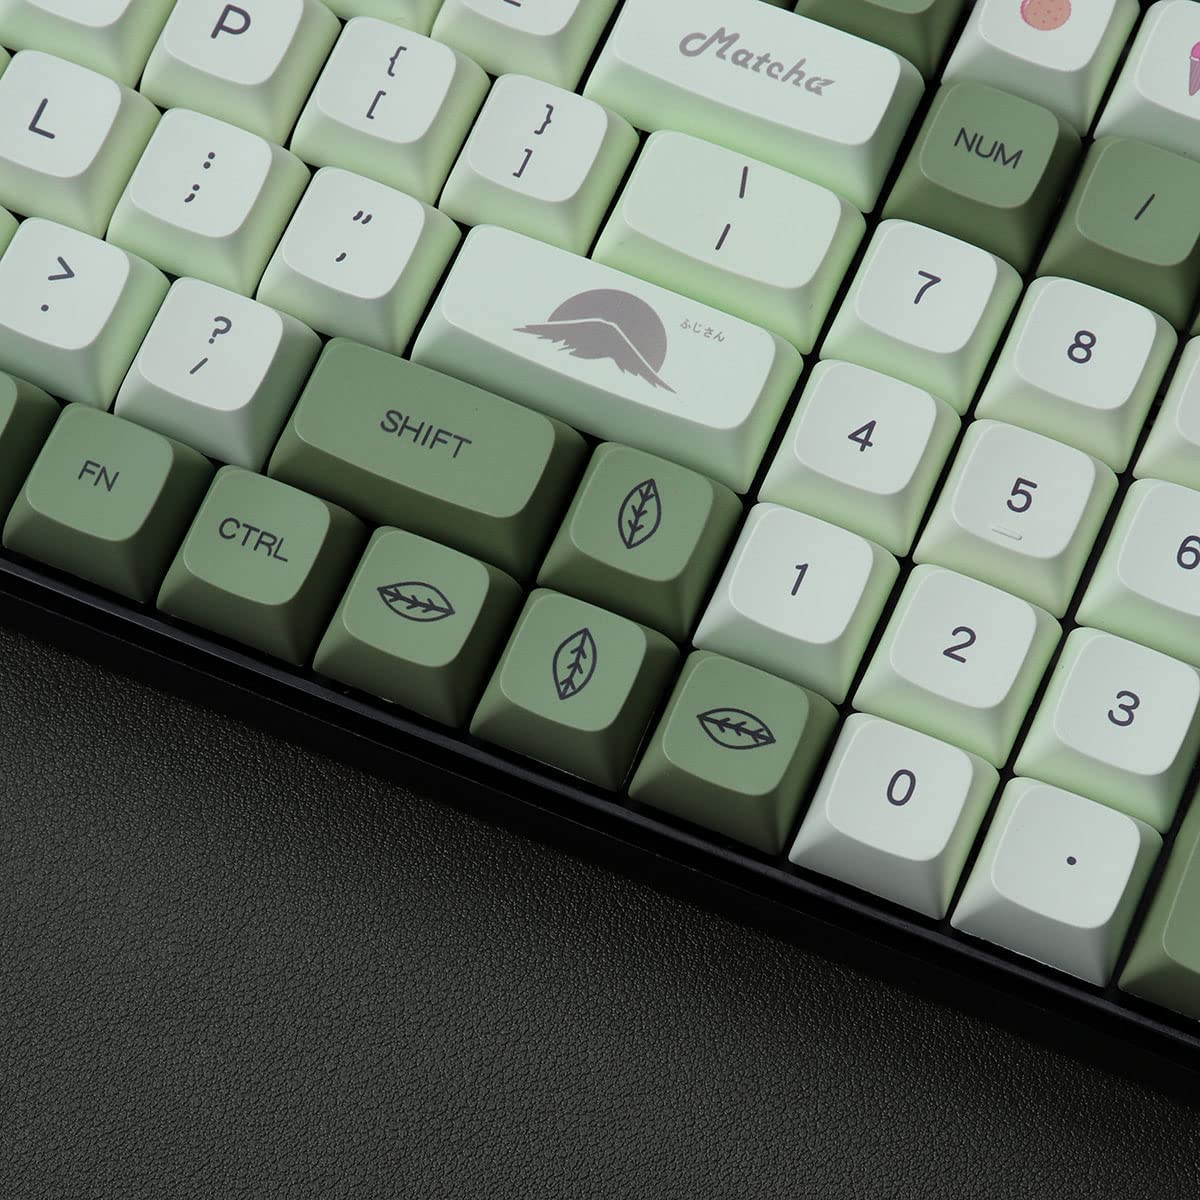 A gaming keyboard that has shorter keycaps and that is compact, will be better for a gamer with small hands.